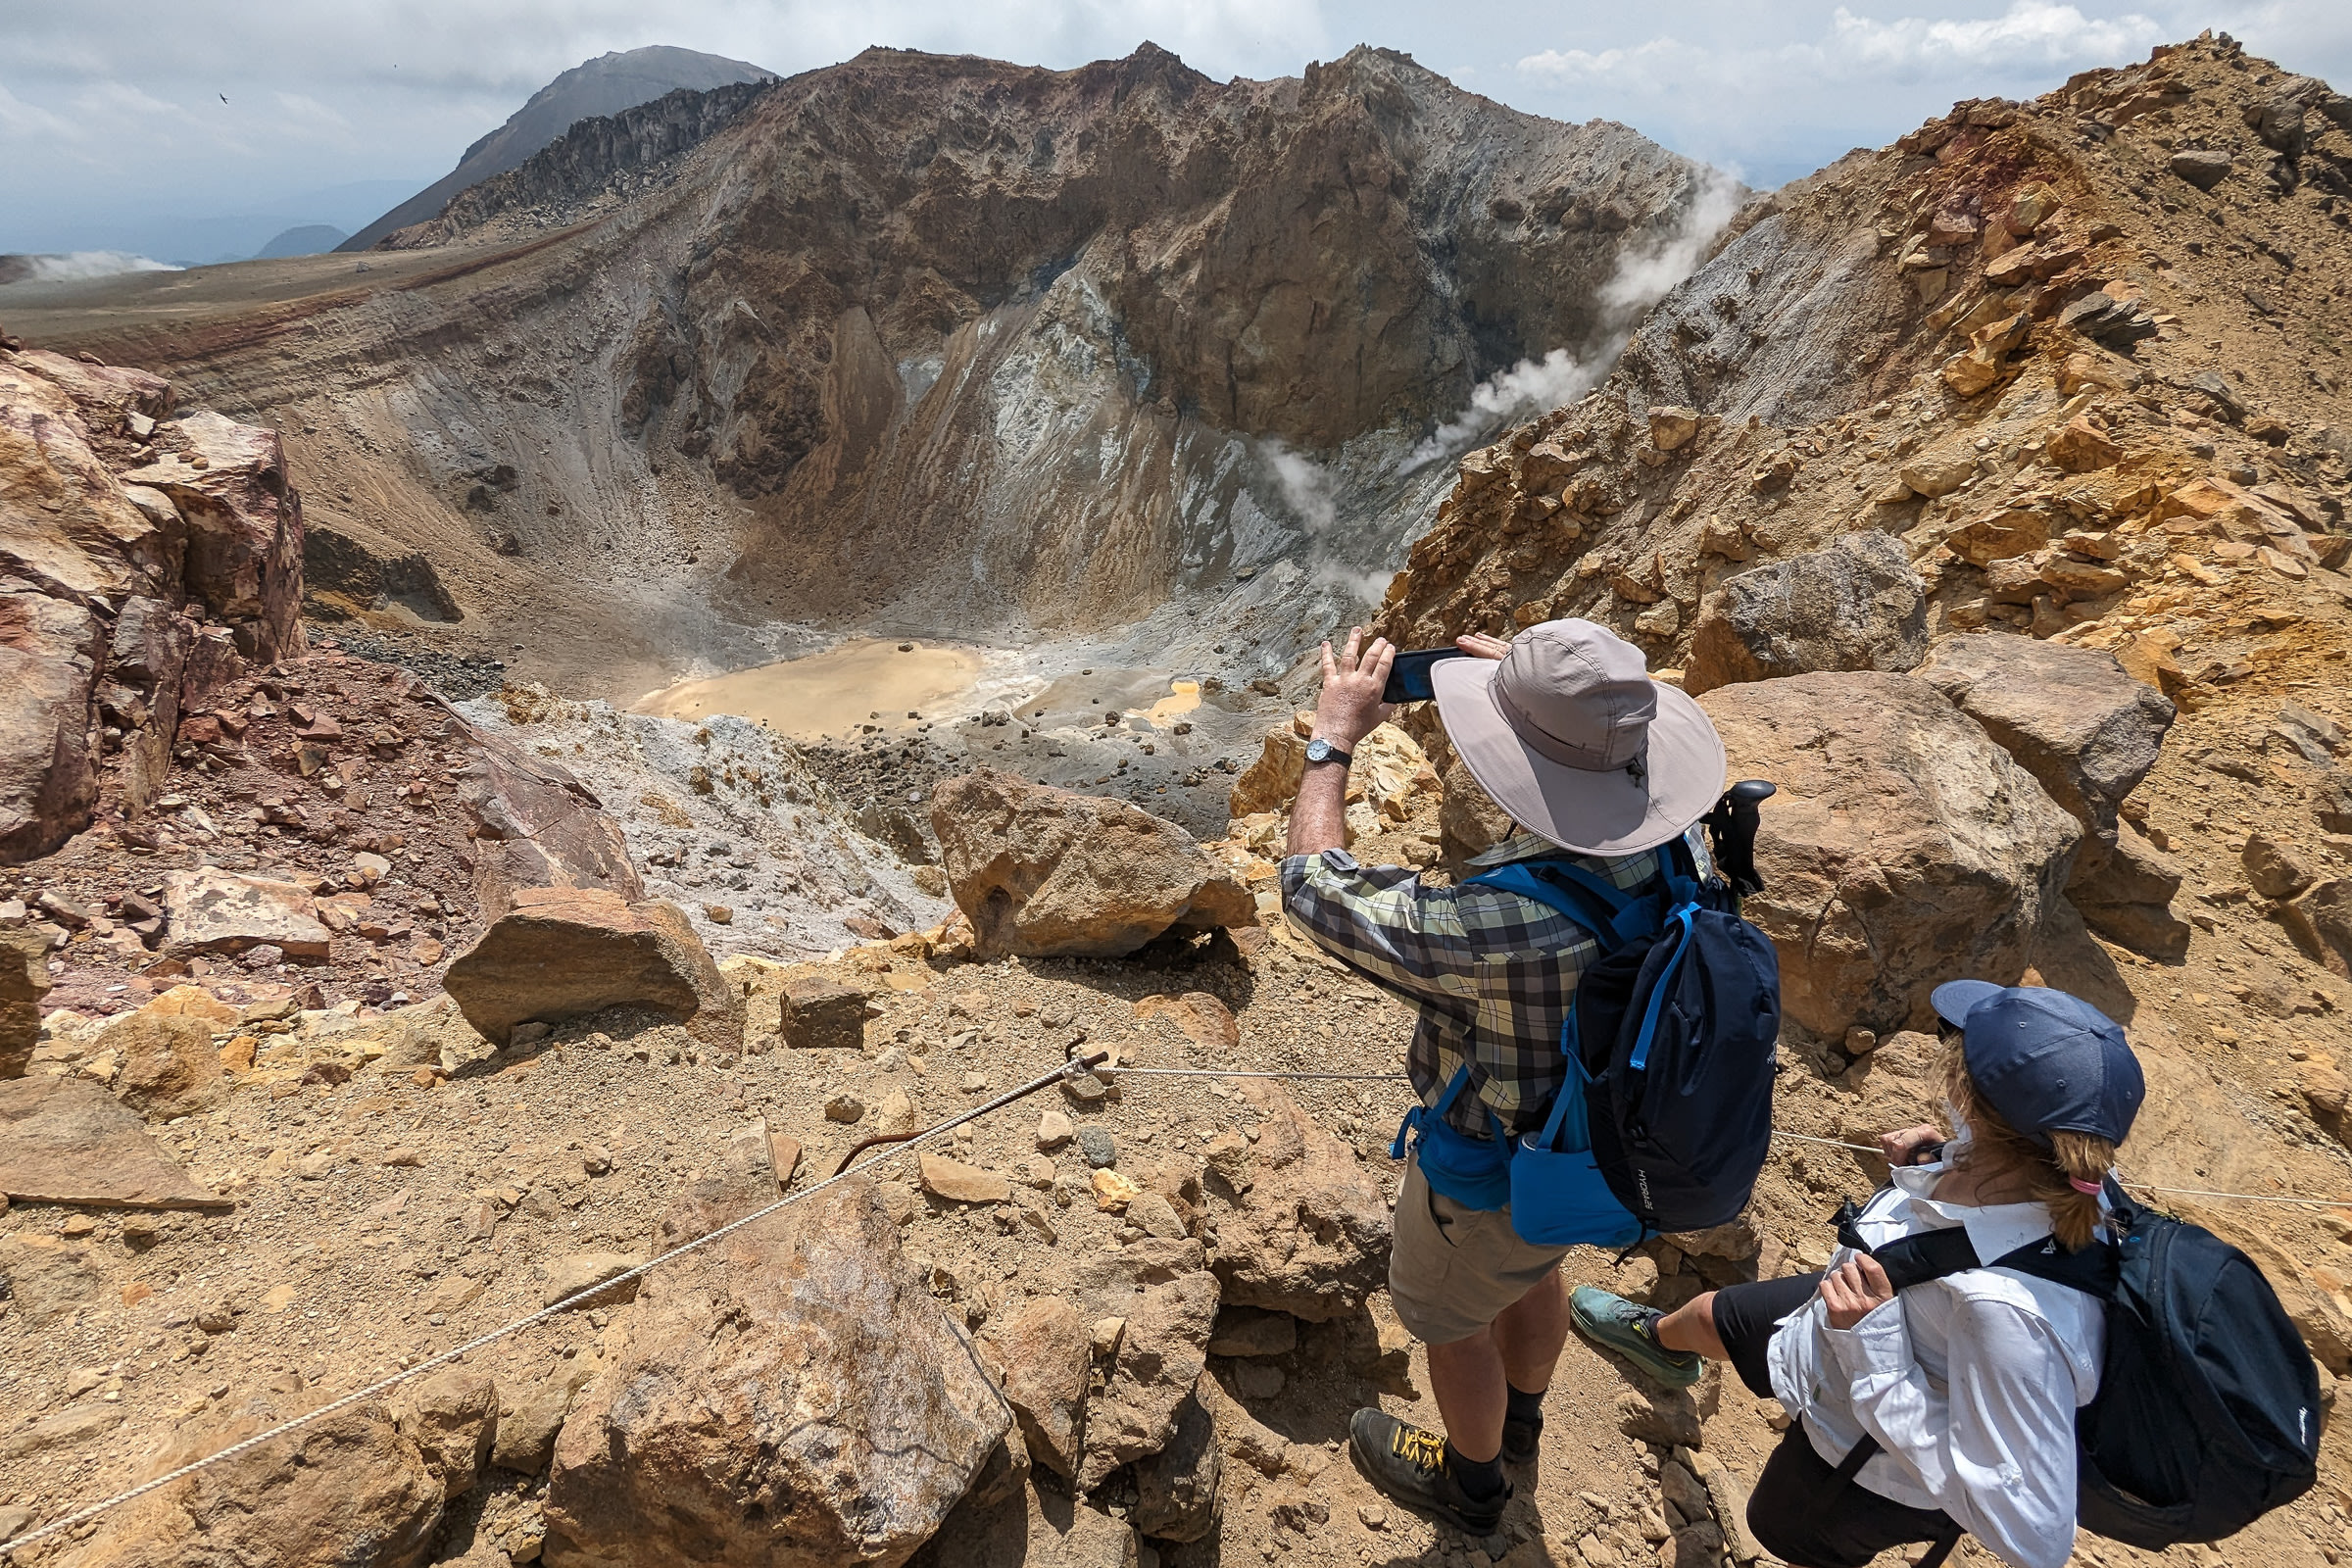 Hikers take pictures of Mt Meakan's craters from up high.